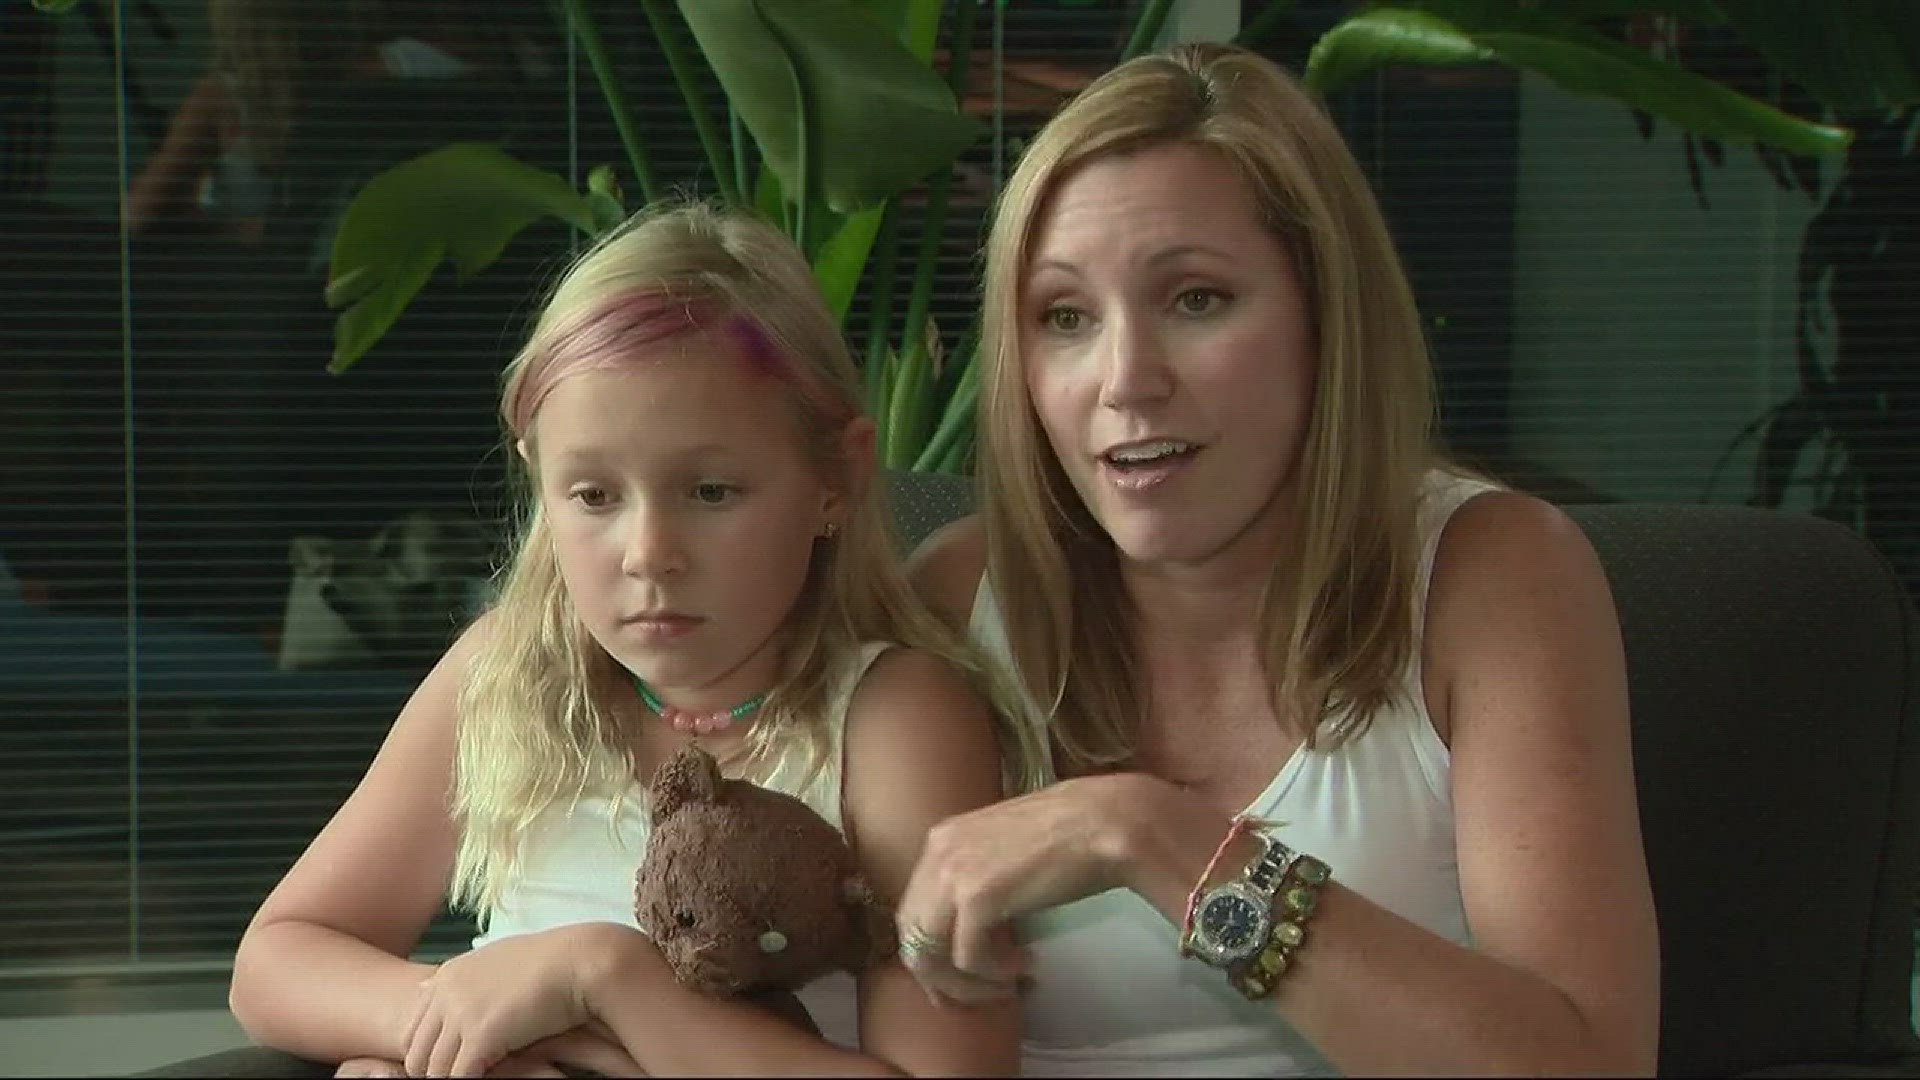 American Airlines staff went above and beyond to return a Charlotte girl's lost teddy bear.